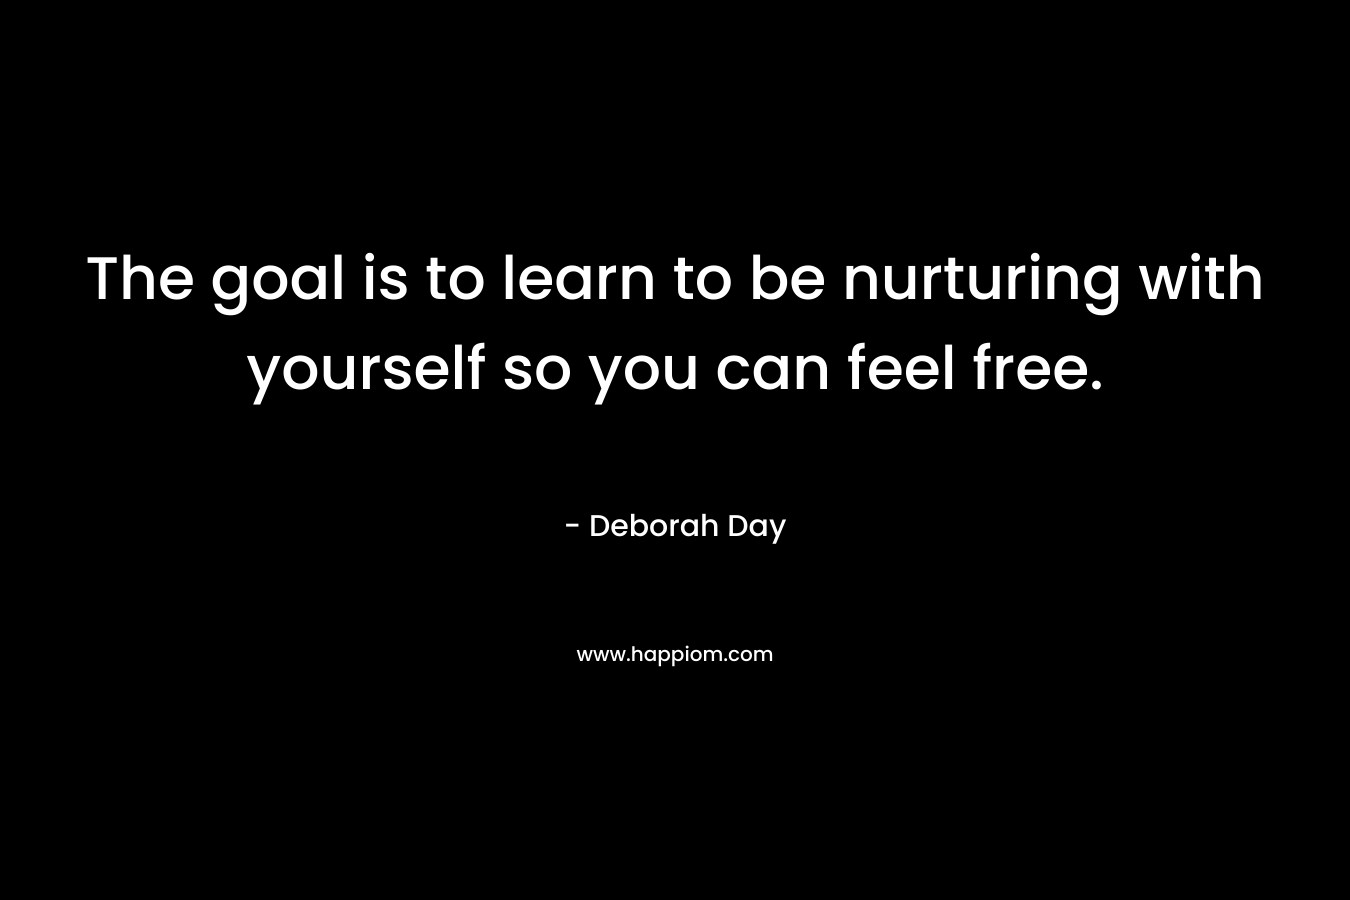 The goal is to learn to be nurturing with yourself so you can feel free.